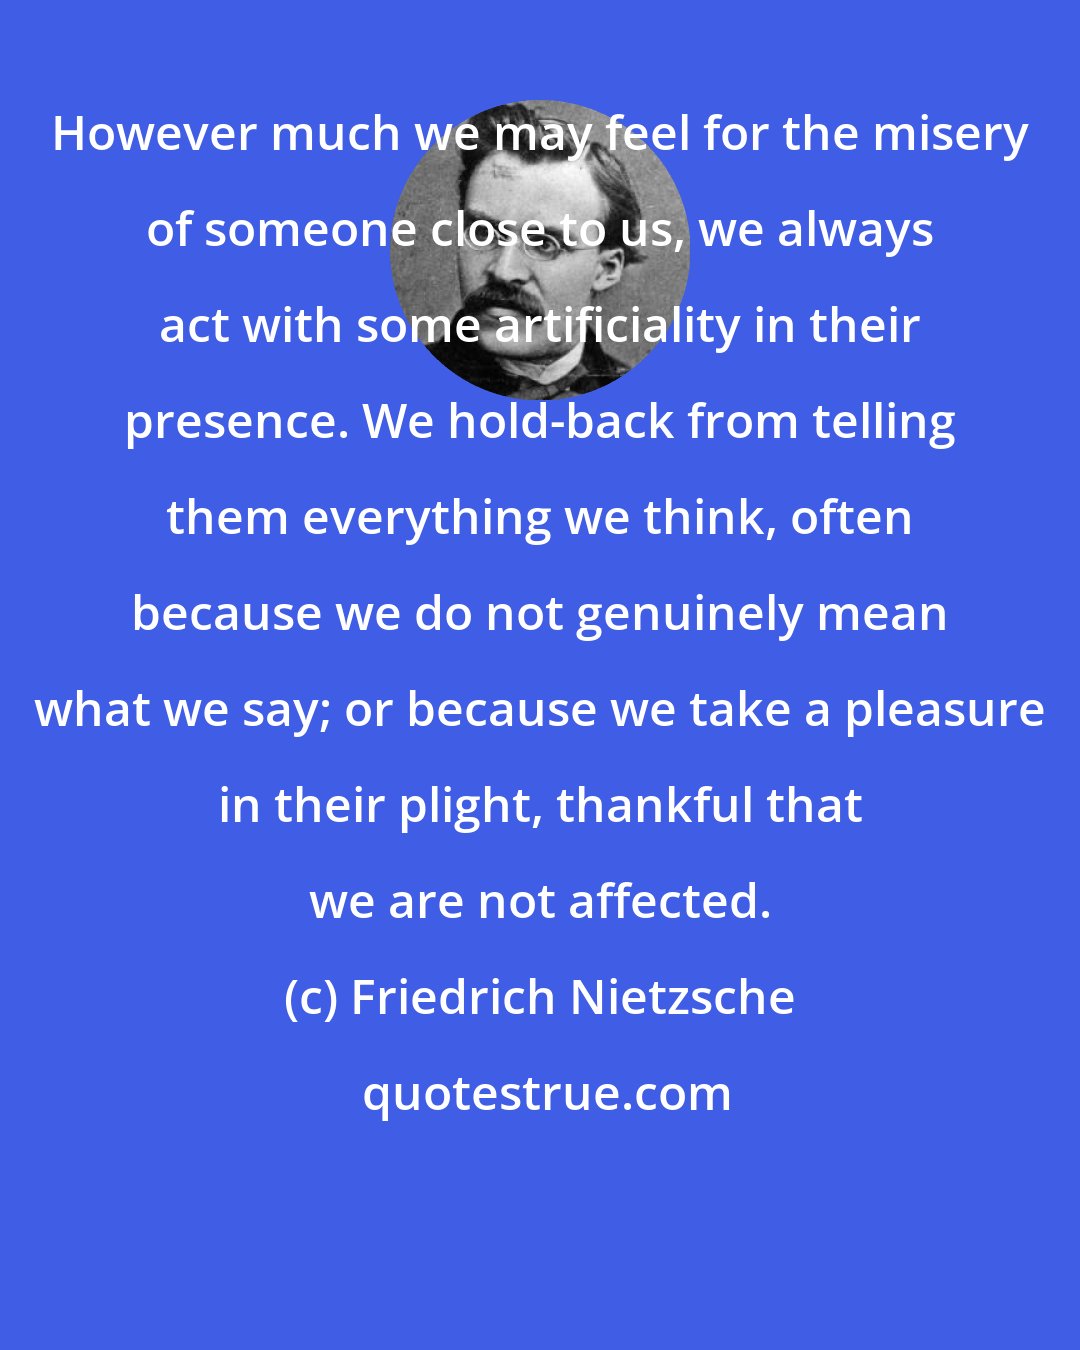 Friedrich Nietzsche: However much we may feel for the misery of someone close to us, we always act with some artificiality in their presence. We hold-back from telling them everything we think, often because we do not genuinely mean what we say; or because we take a pleasure in their plight, thankful that we are not affected.